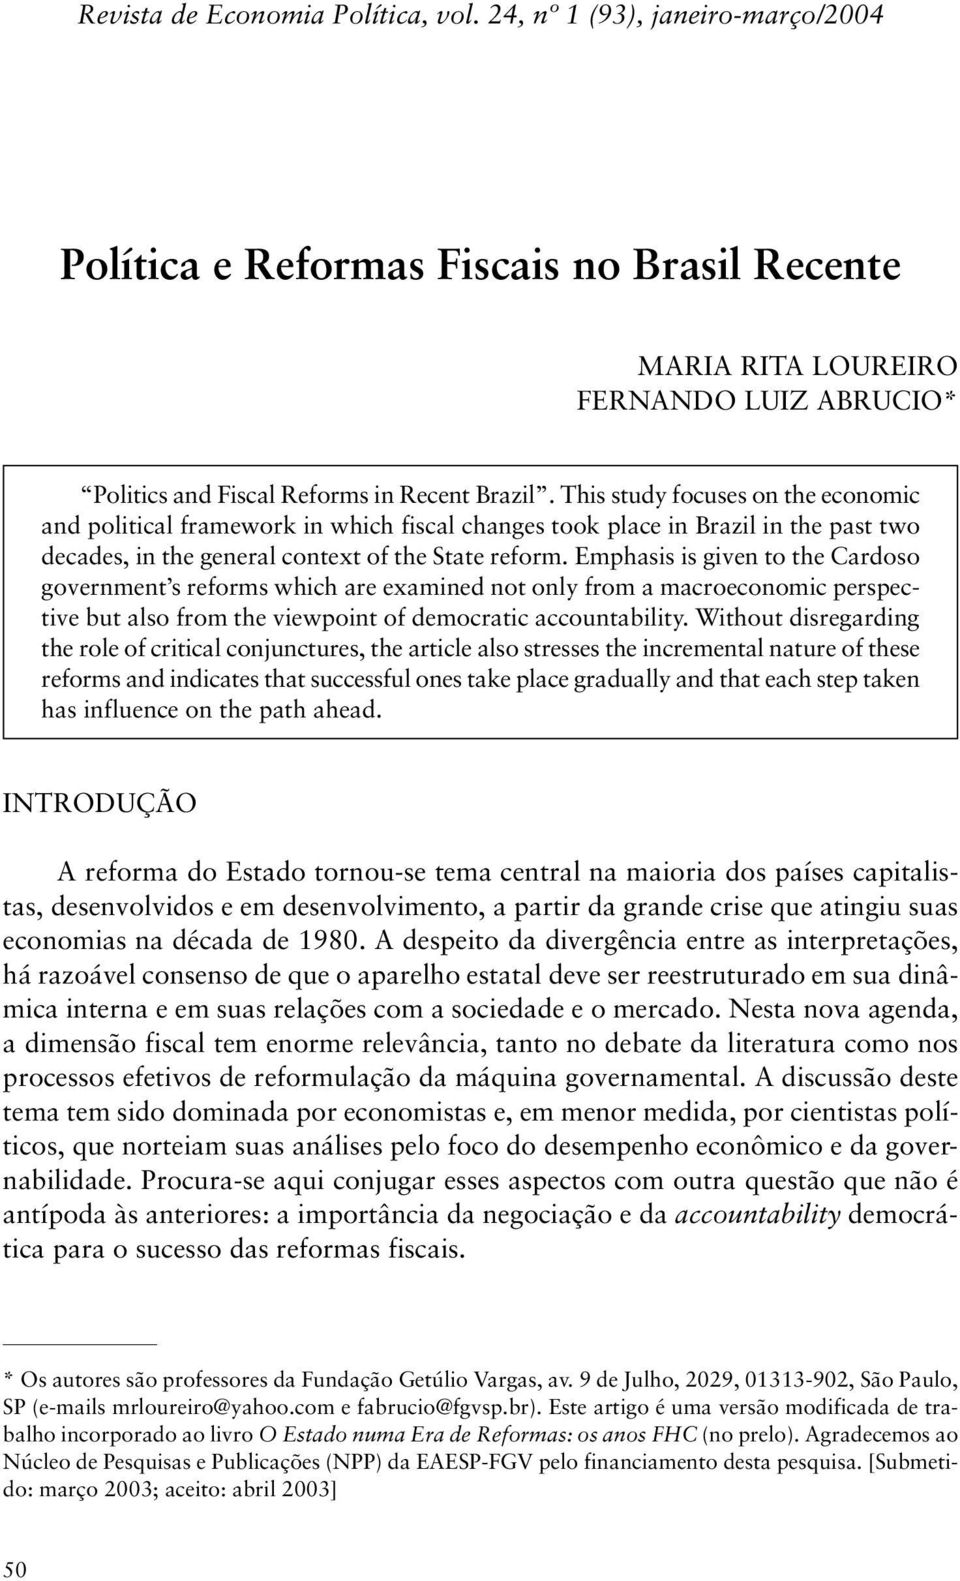 This study focuses on the economic and political framework in which fiscal changes took place in Brazil in the past two decades, in the general context of the State reform.